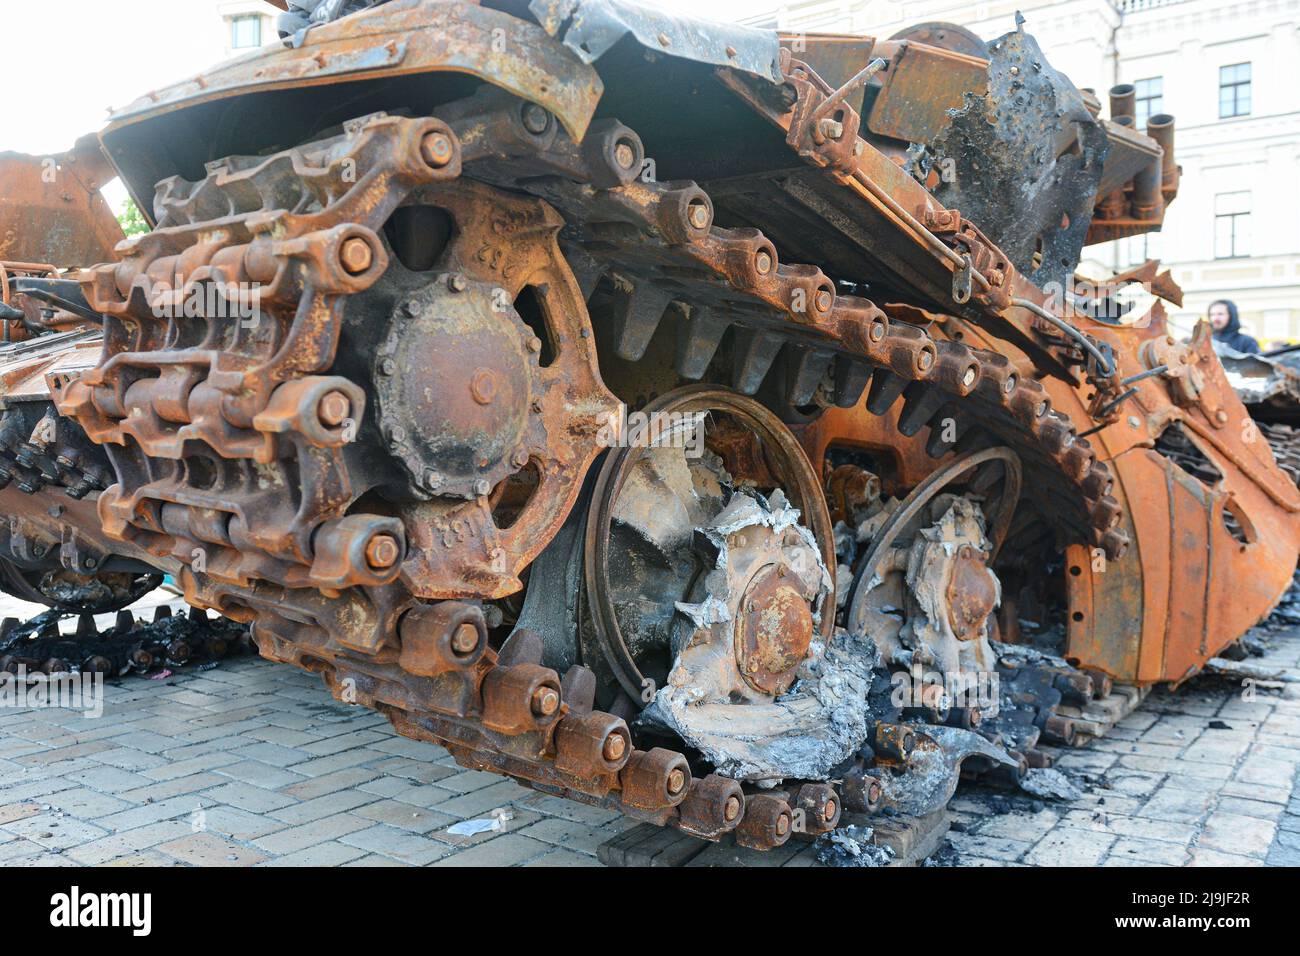 Kyiv, Ukraine. 23rd May, 2022. A view of a Russian tank exhibited at Mykhailivska Square. Russia invaded Ukraine on 24 February 2022, triggering the largest military attack in Europe since World War II. Credit: SOPA Images Limited/Alamy Live News Stock Photo